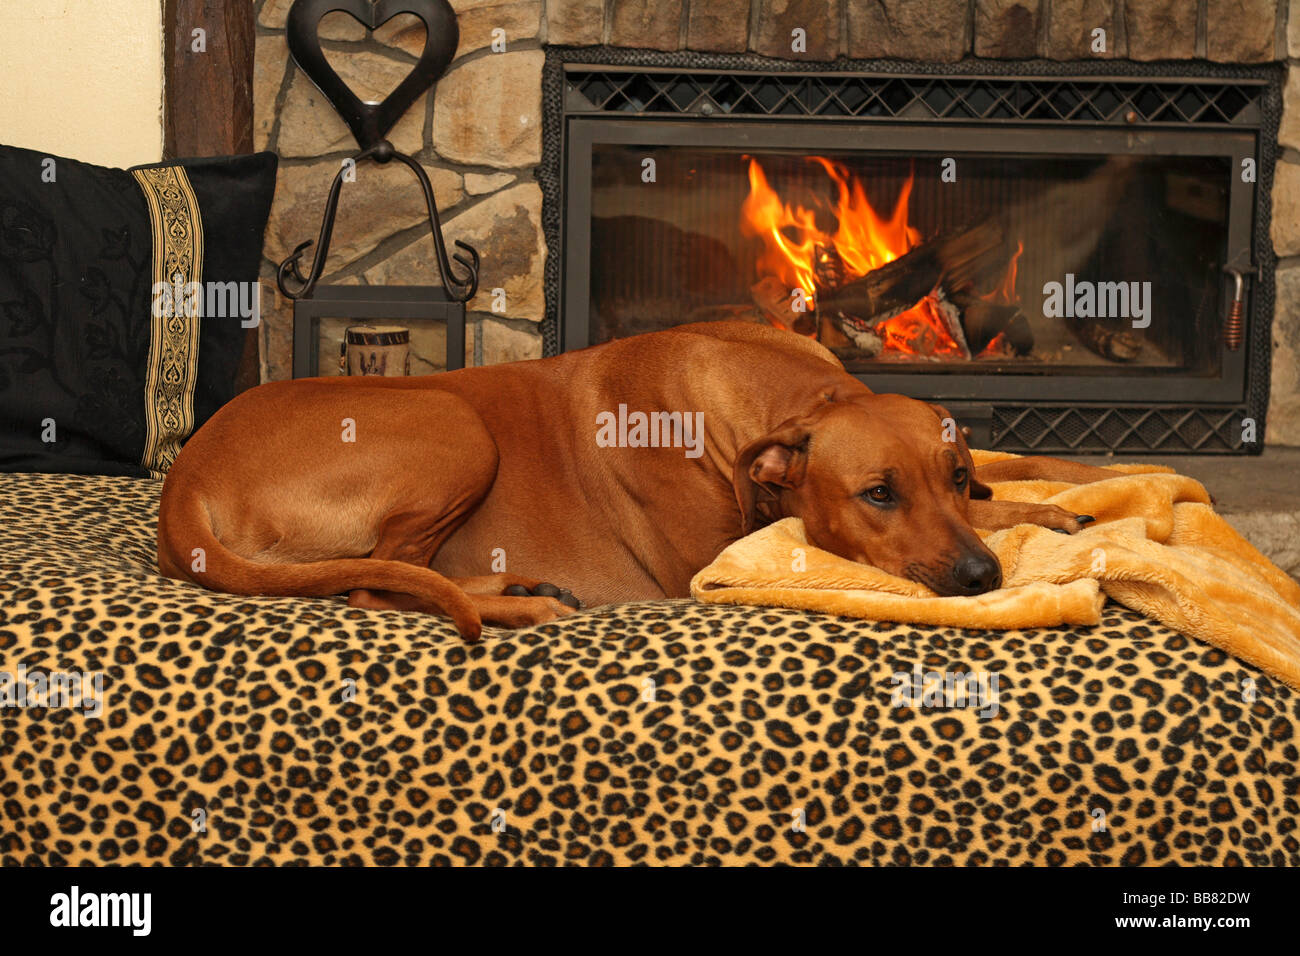 Rhodesian Ridgeback (Canis lupus f. familiaris), lying on a sofa in front of a chimney Stock Photo